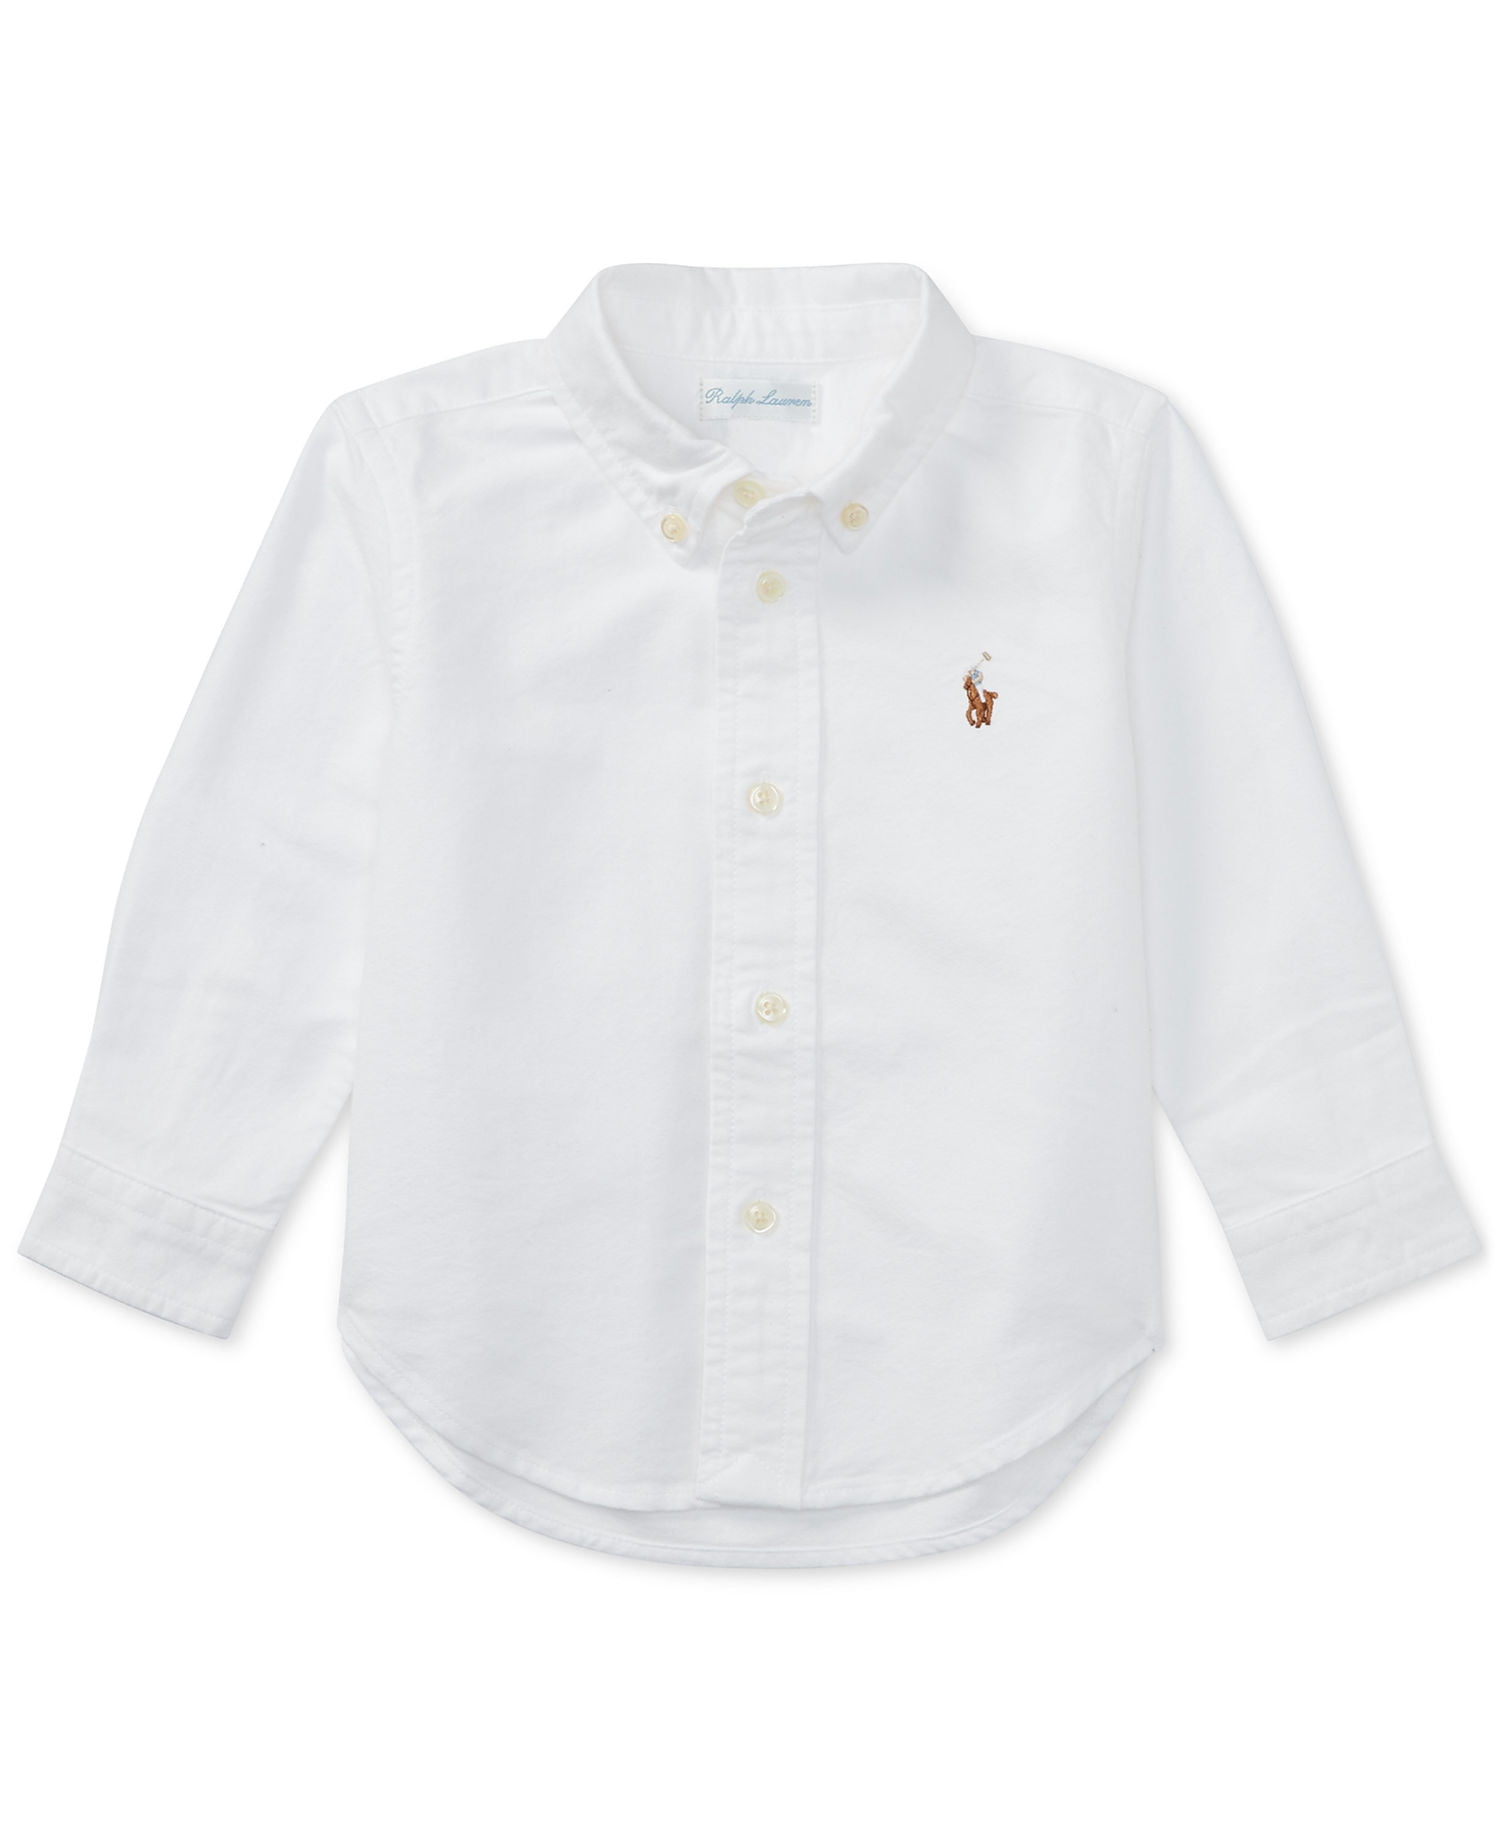 Polo by Ralph Lauren Baby Boys White 